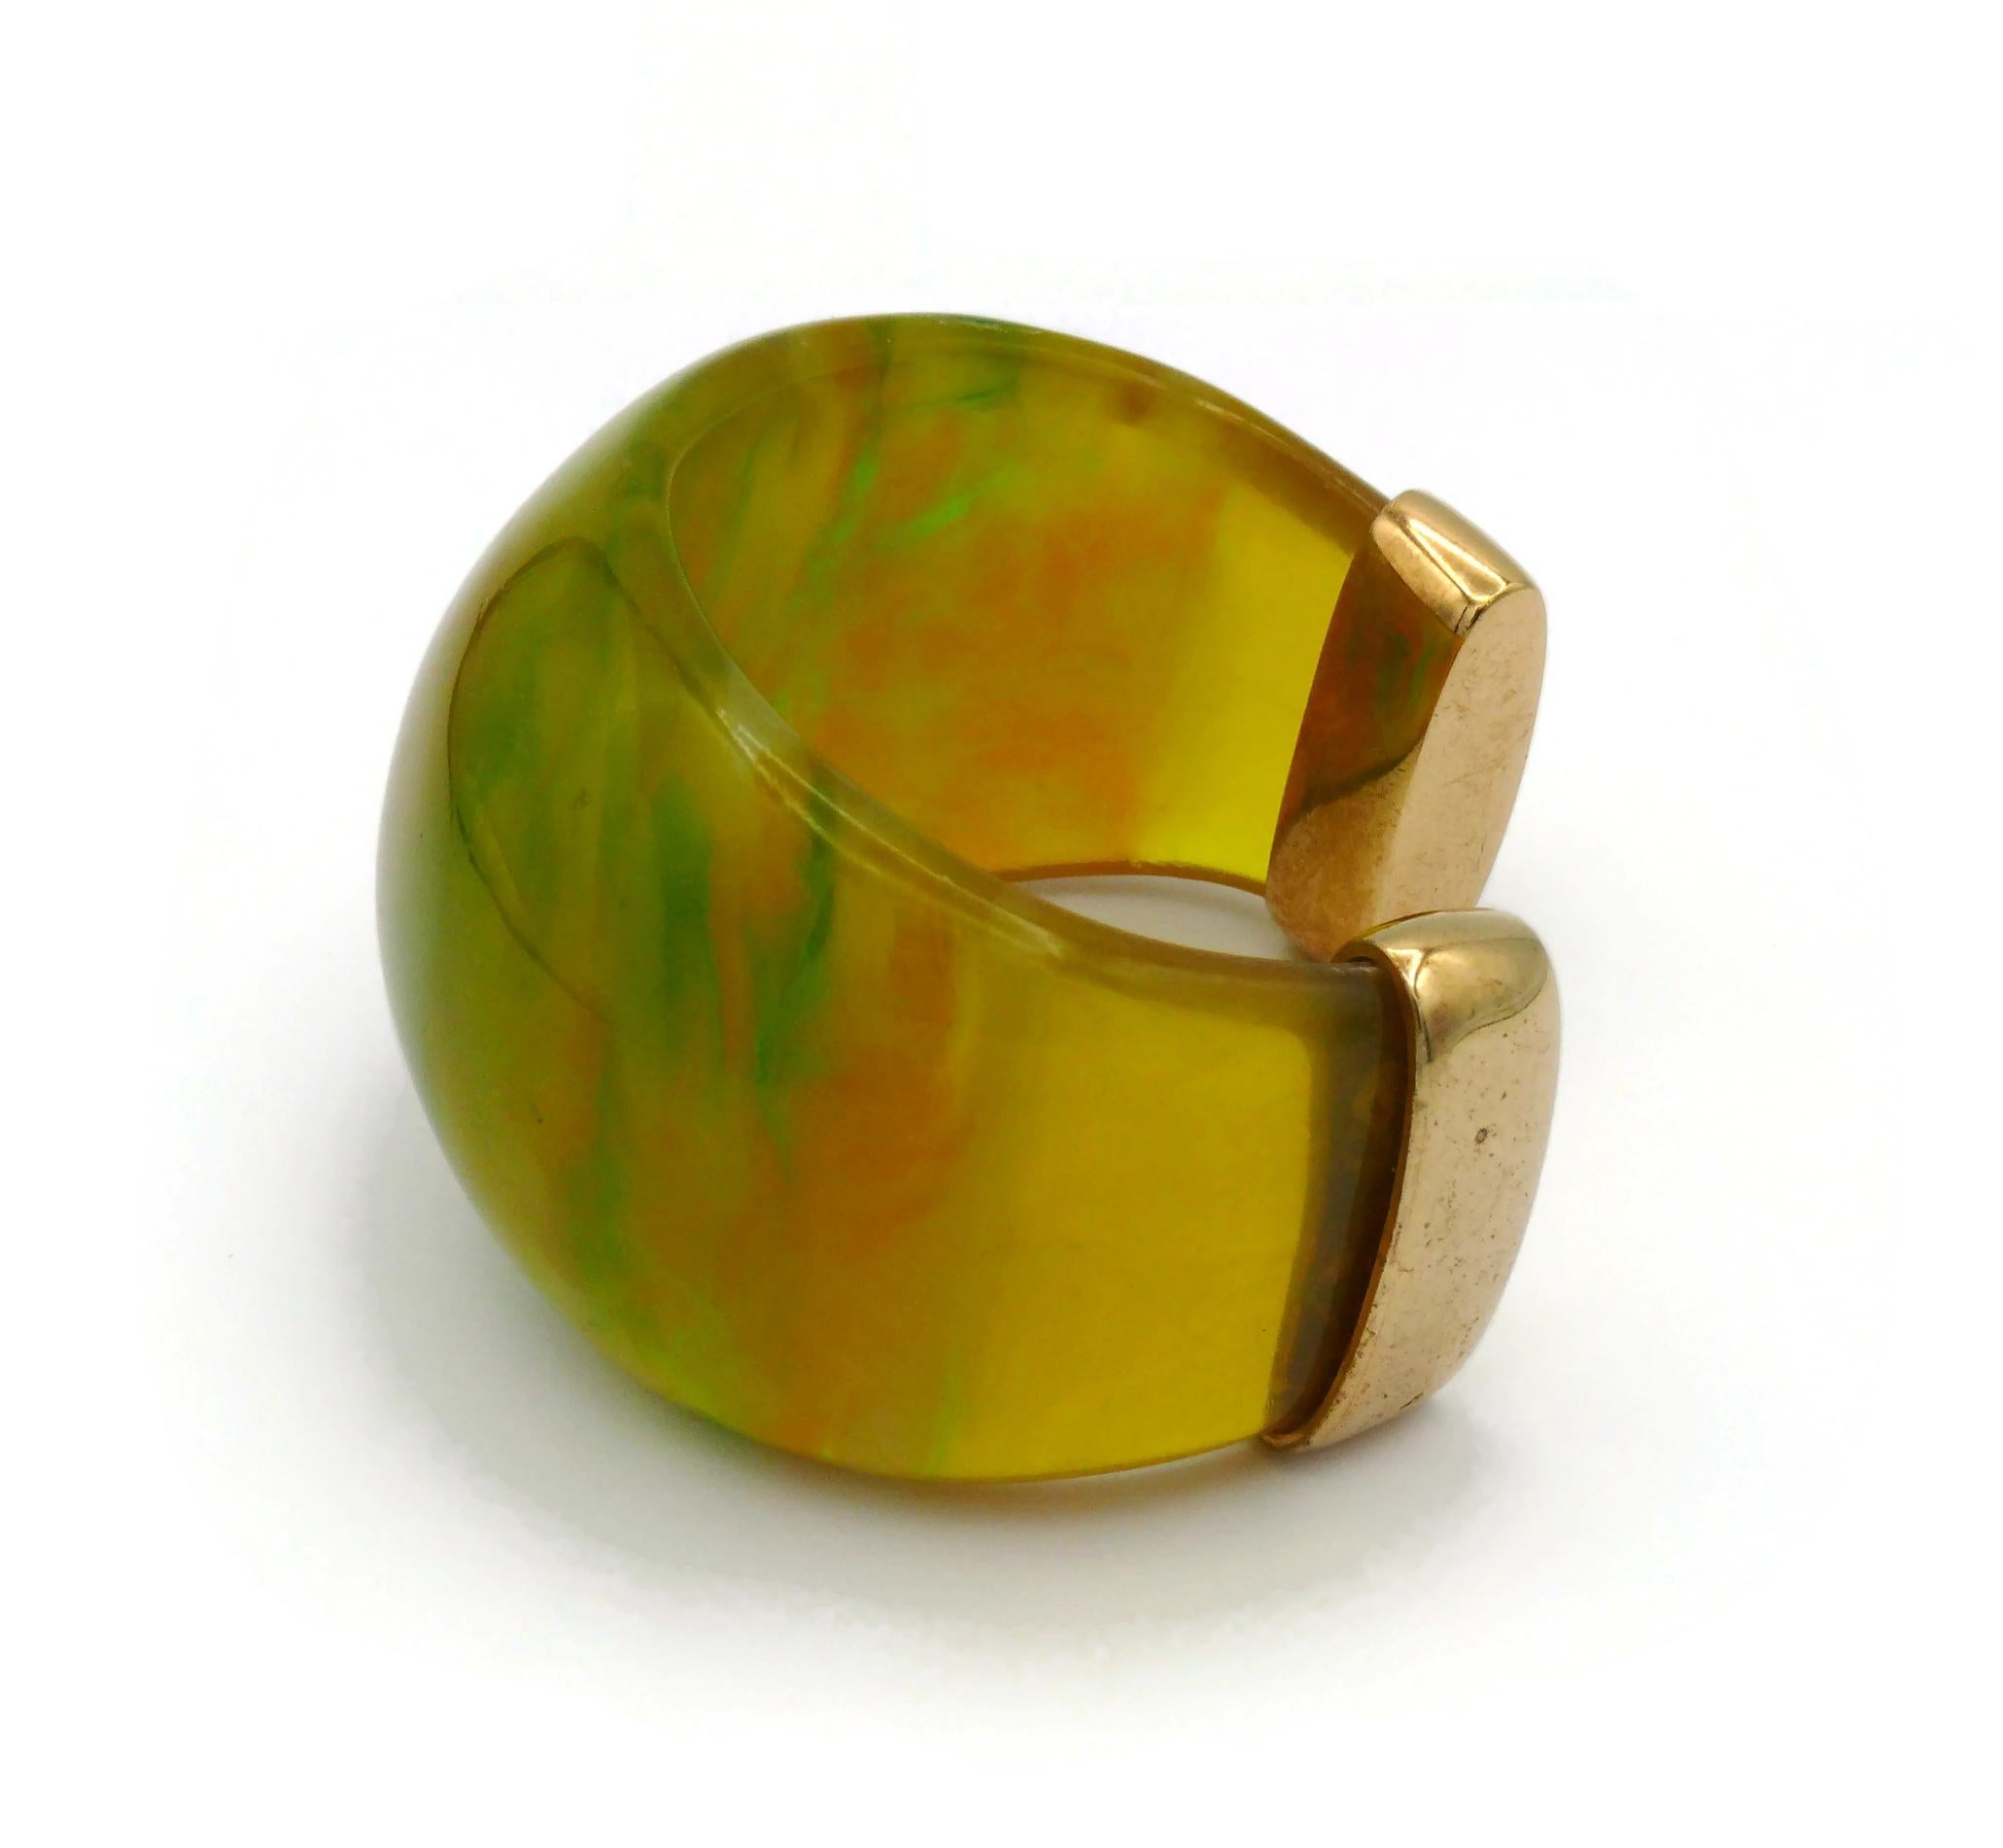 YVES SAINT LAURENT YSL Vintage Yellow Green Marbled Resin Cuff Bracelet For Sale 7